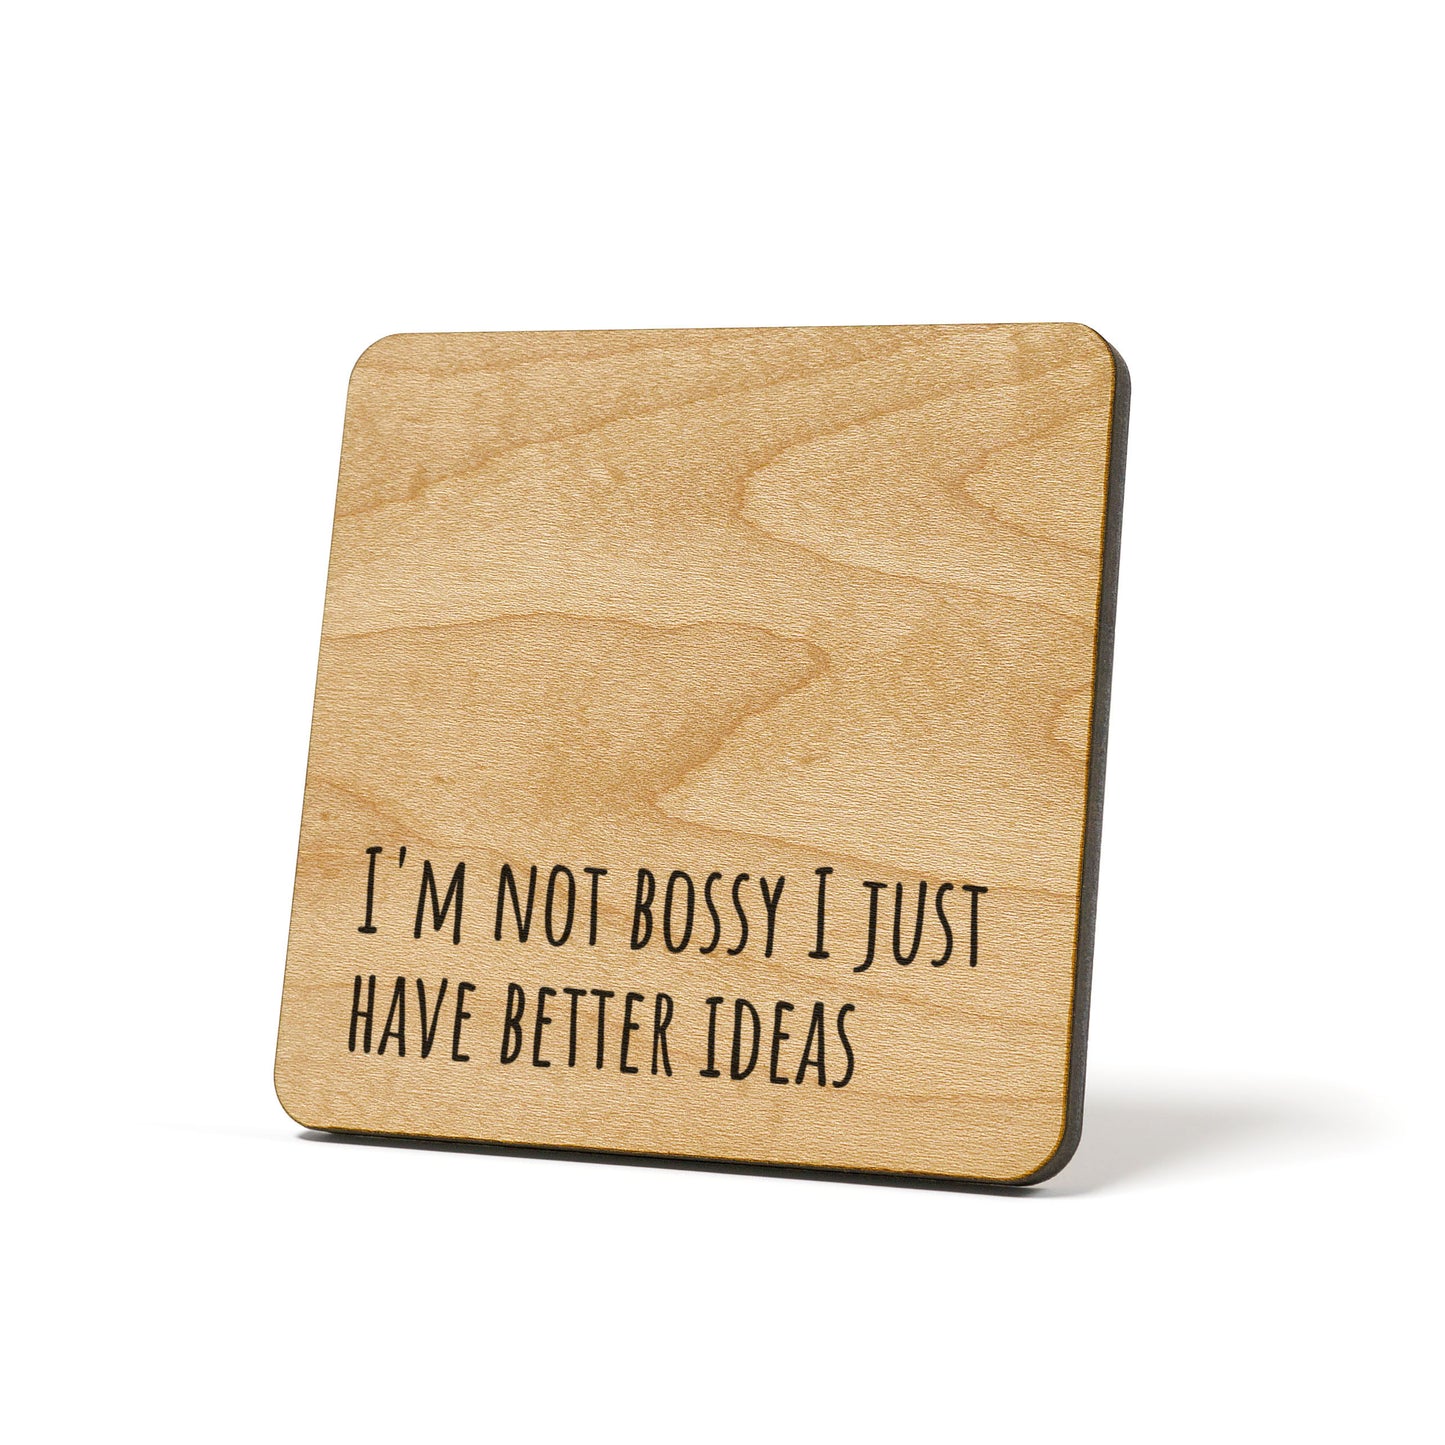 I'm not bossy I just have better ideas Quote Coaster